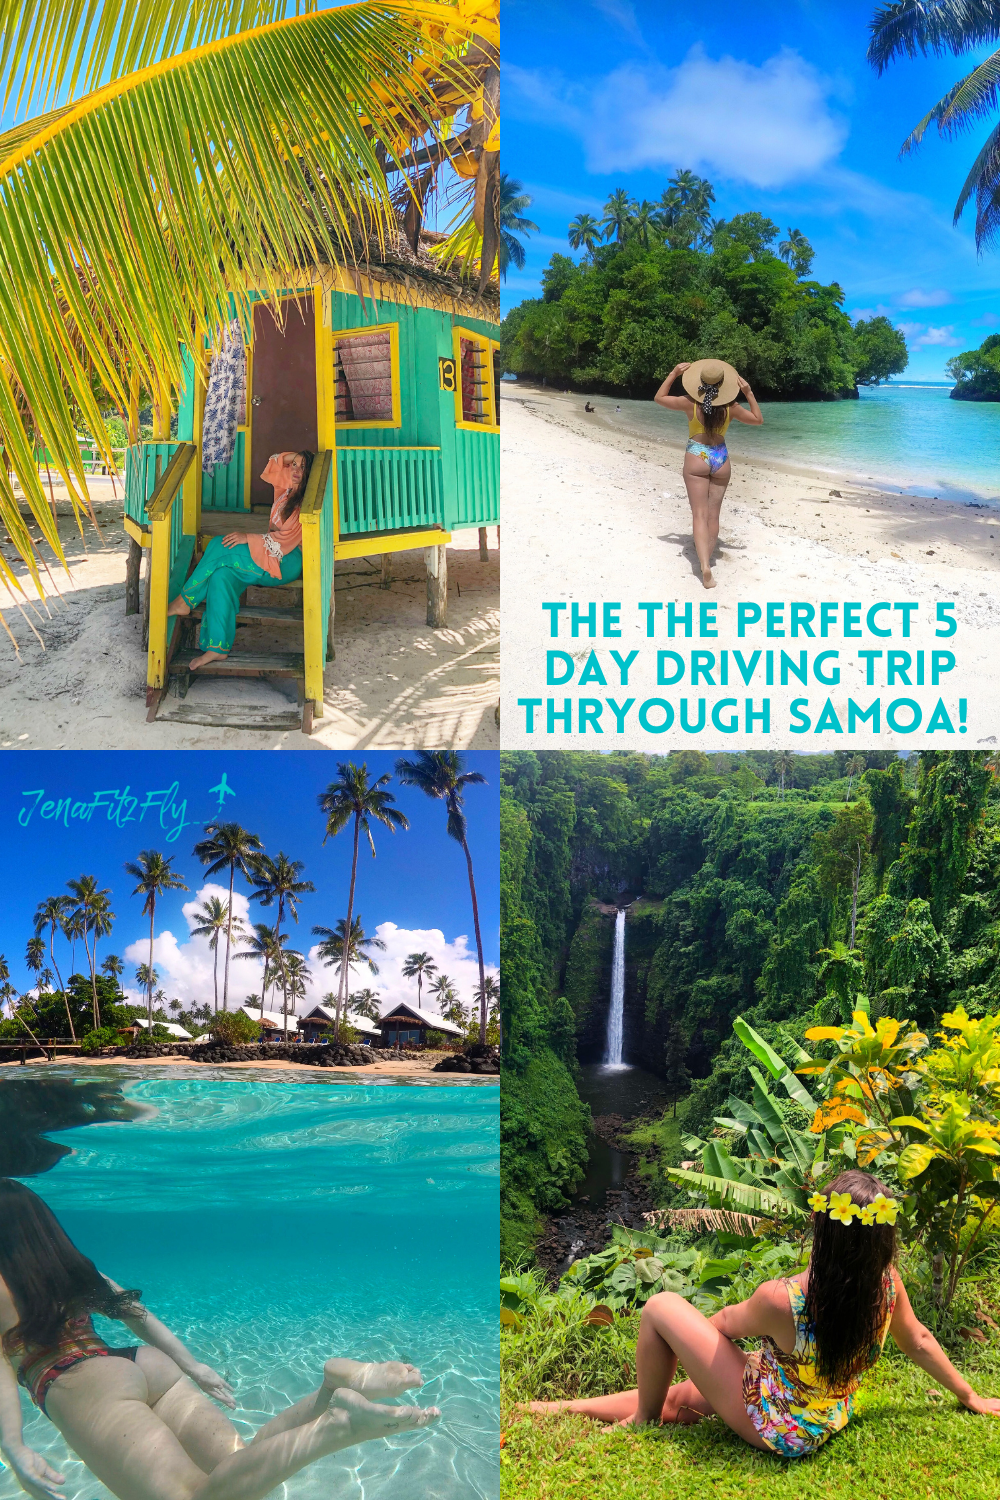 If you've always wanted to explore Samoa, but don't know where to start, here's the perfect 5 day driving trip through Samoa! You definitely need a car to explore this whole island and you definitely need a full 5 days to see everything there is to see. So for a seamless explorative vacation, just follow this 5 day driving trip through Samoa!